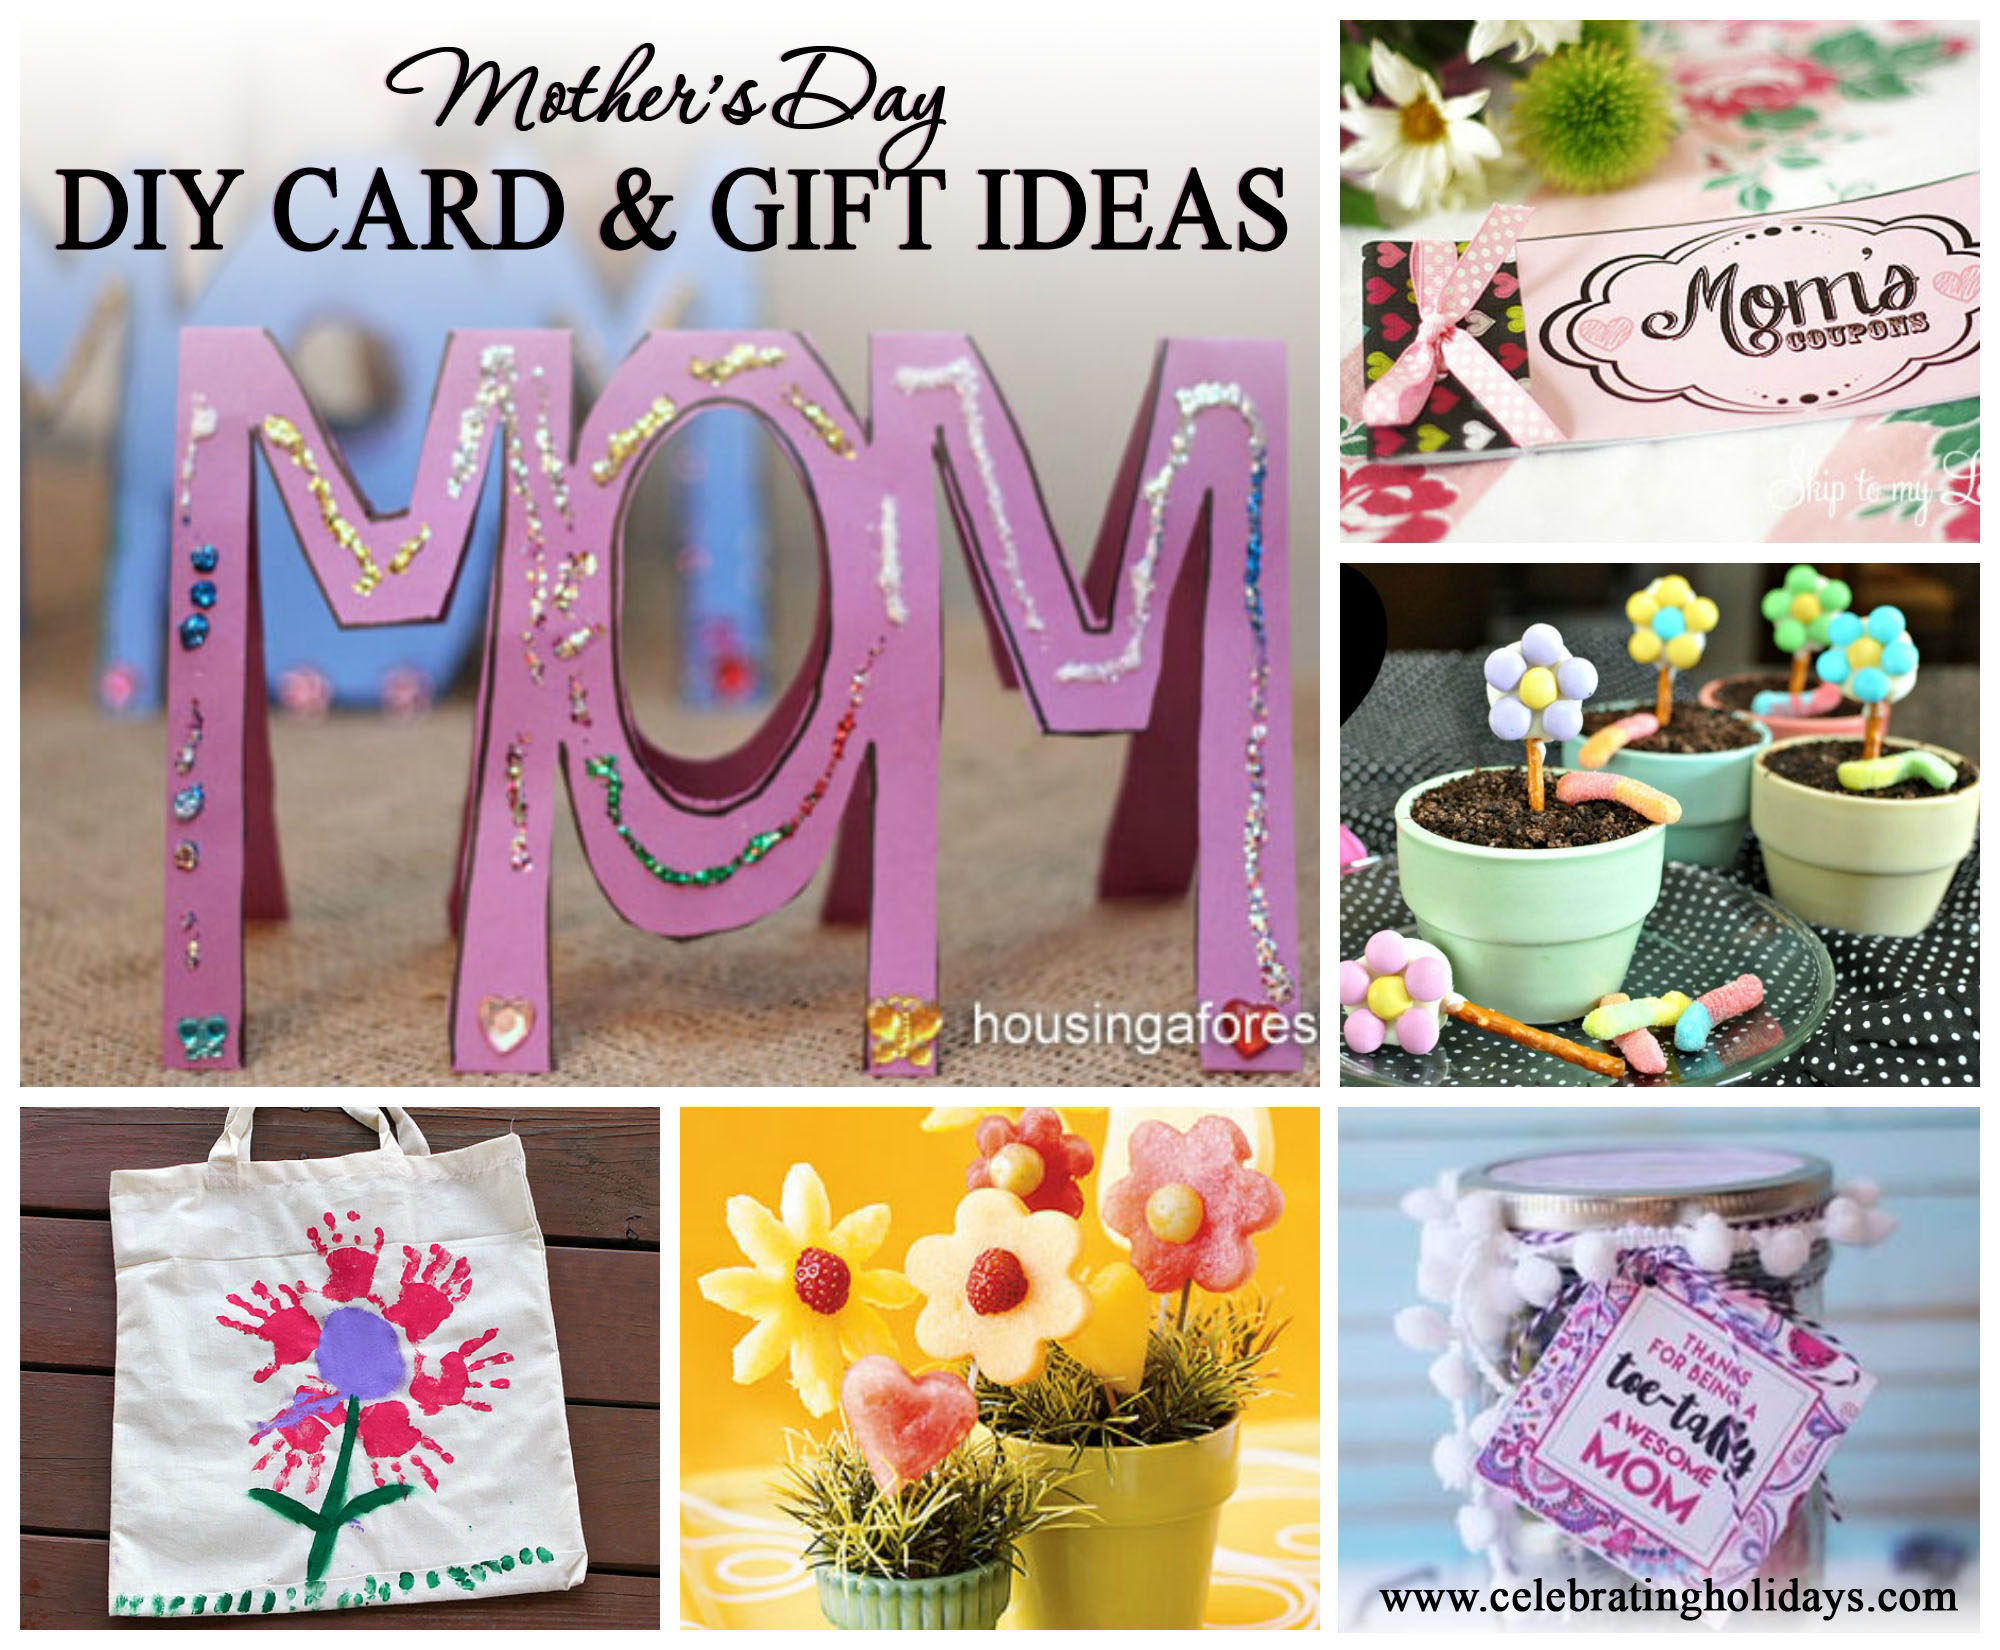 mother's day card and gift ideas | celebrating holidays